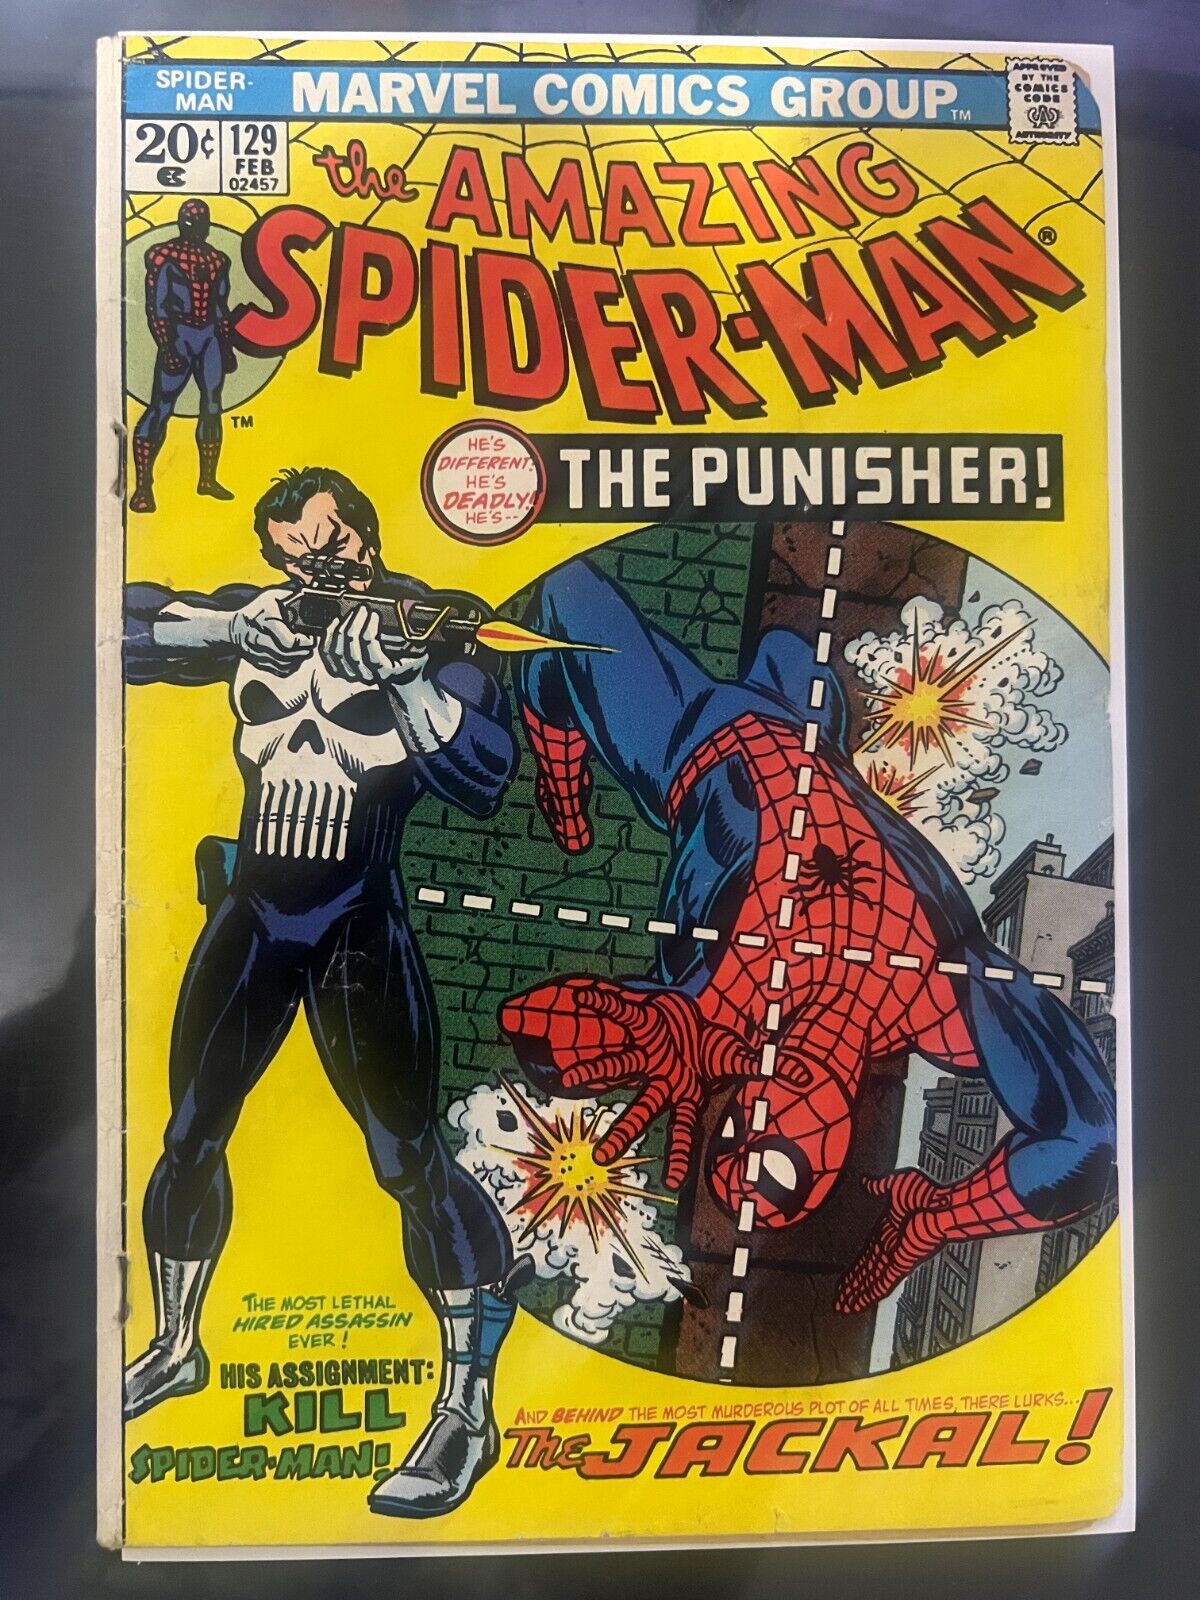 Amazing Spider-Man #129 (1974) Punisher first appearance